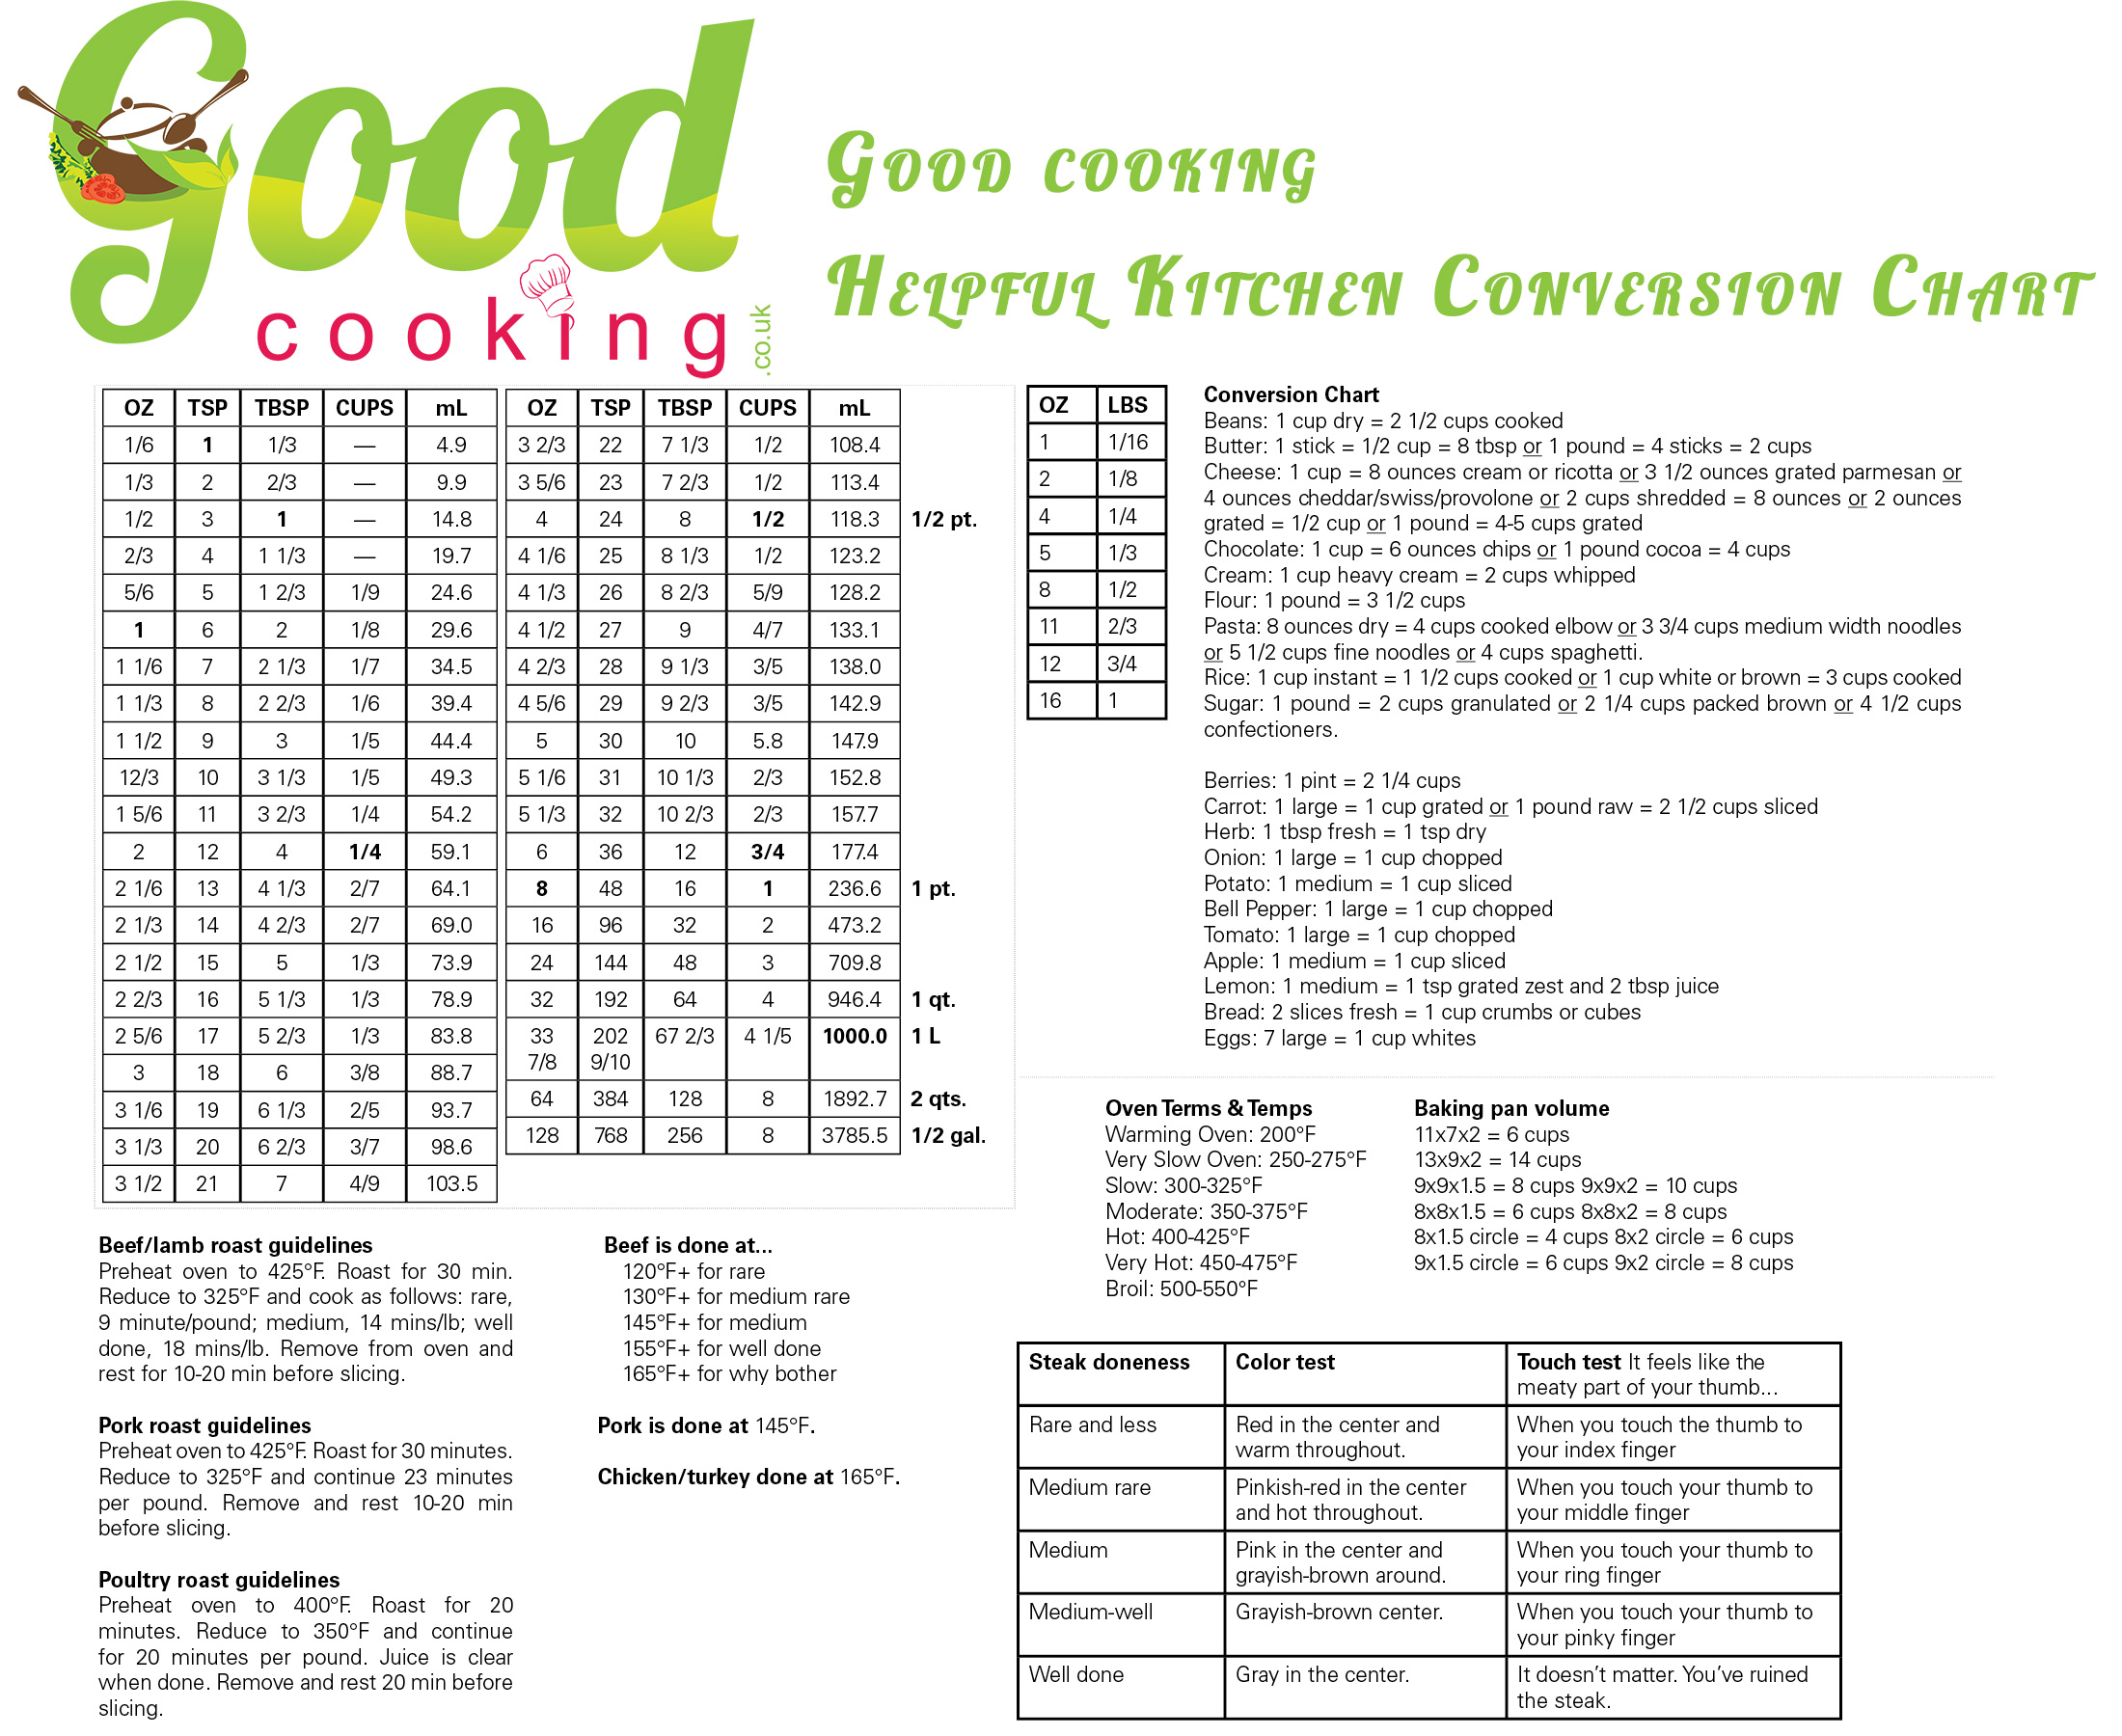 good-cooking-kitchen-conversion-chart-good-cooking